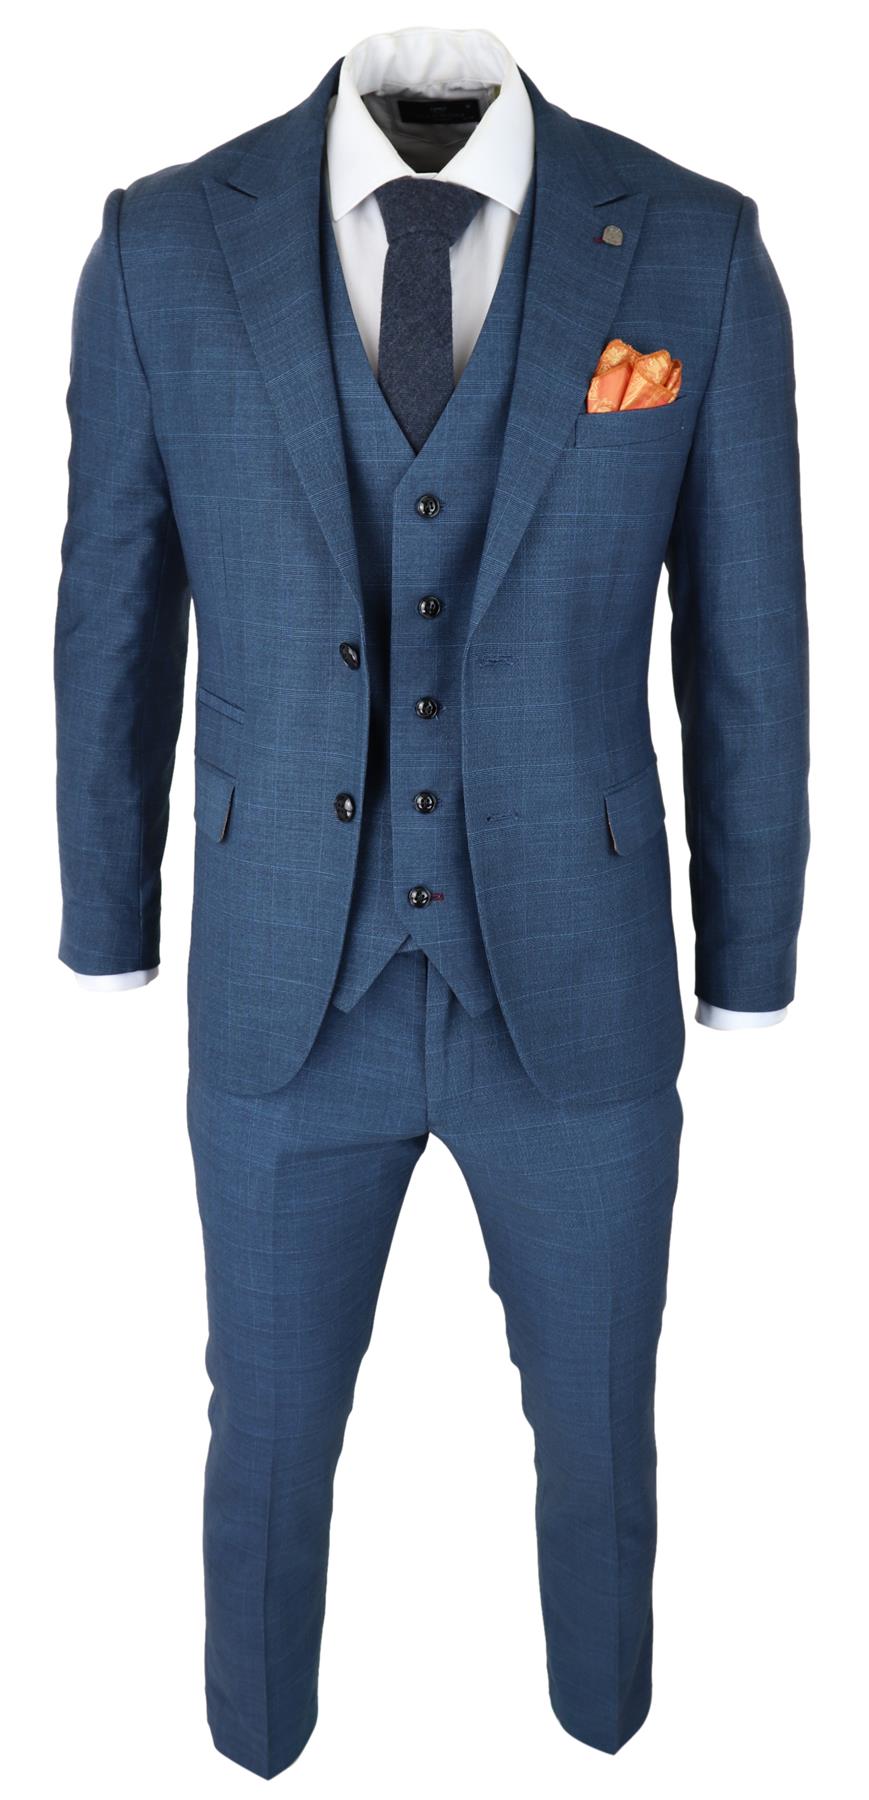 Mens 3 Piece Blue Suit Prince Of Wales Check Classic Light Tailored Fit Modern - Upperclass Fashions 